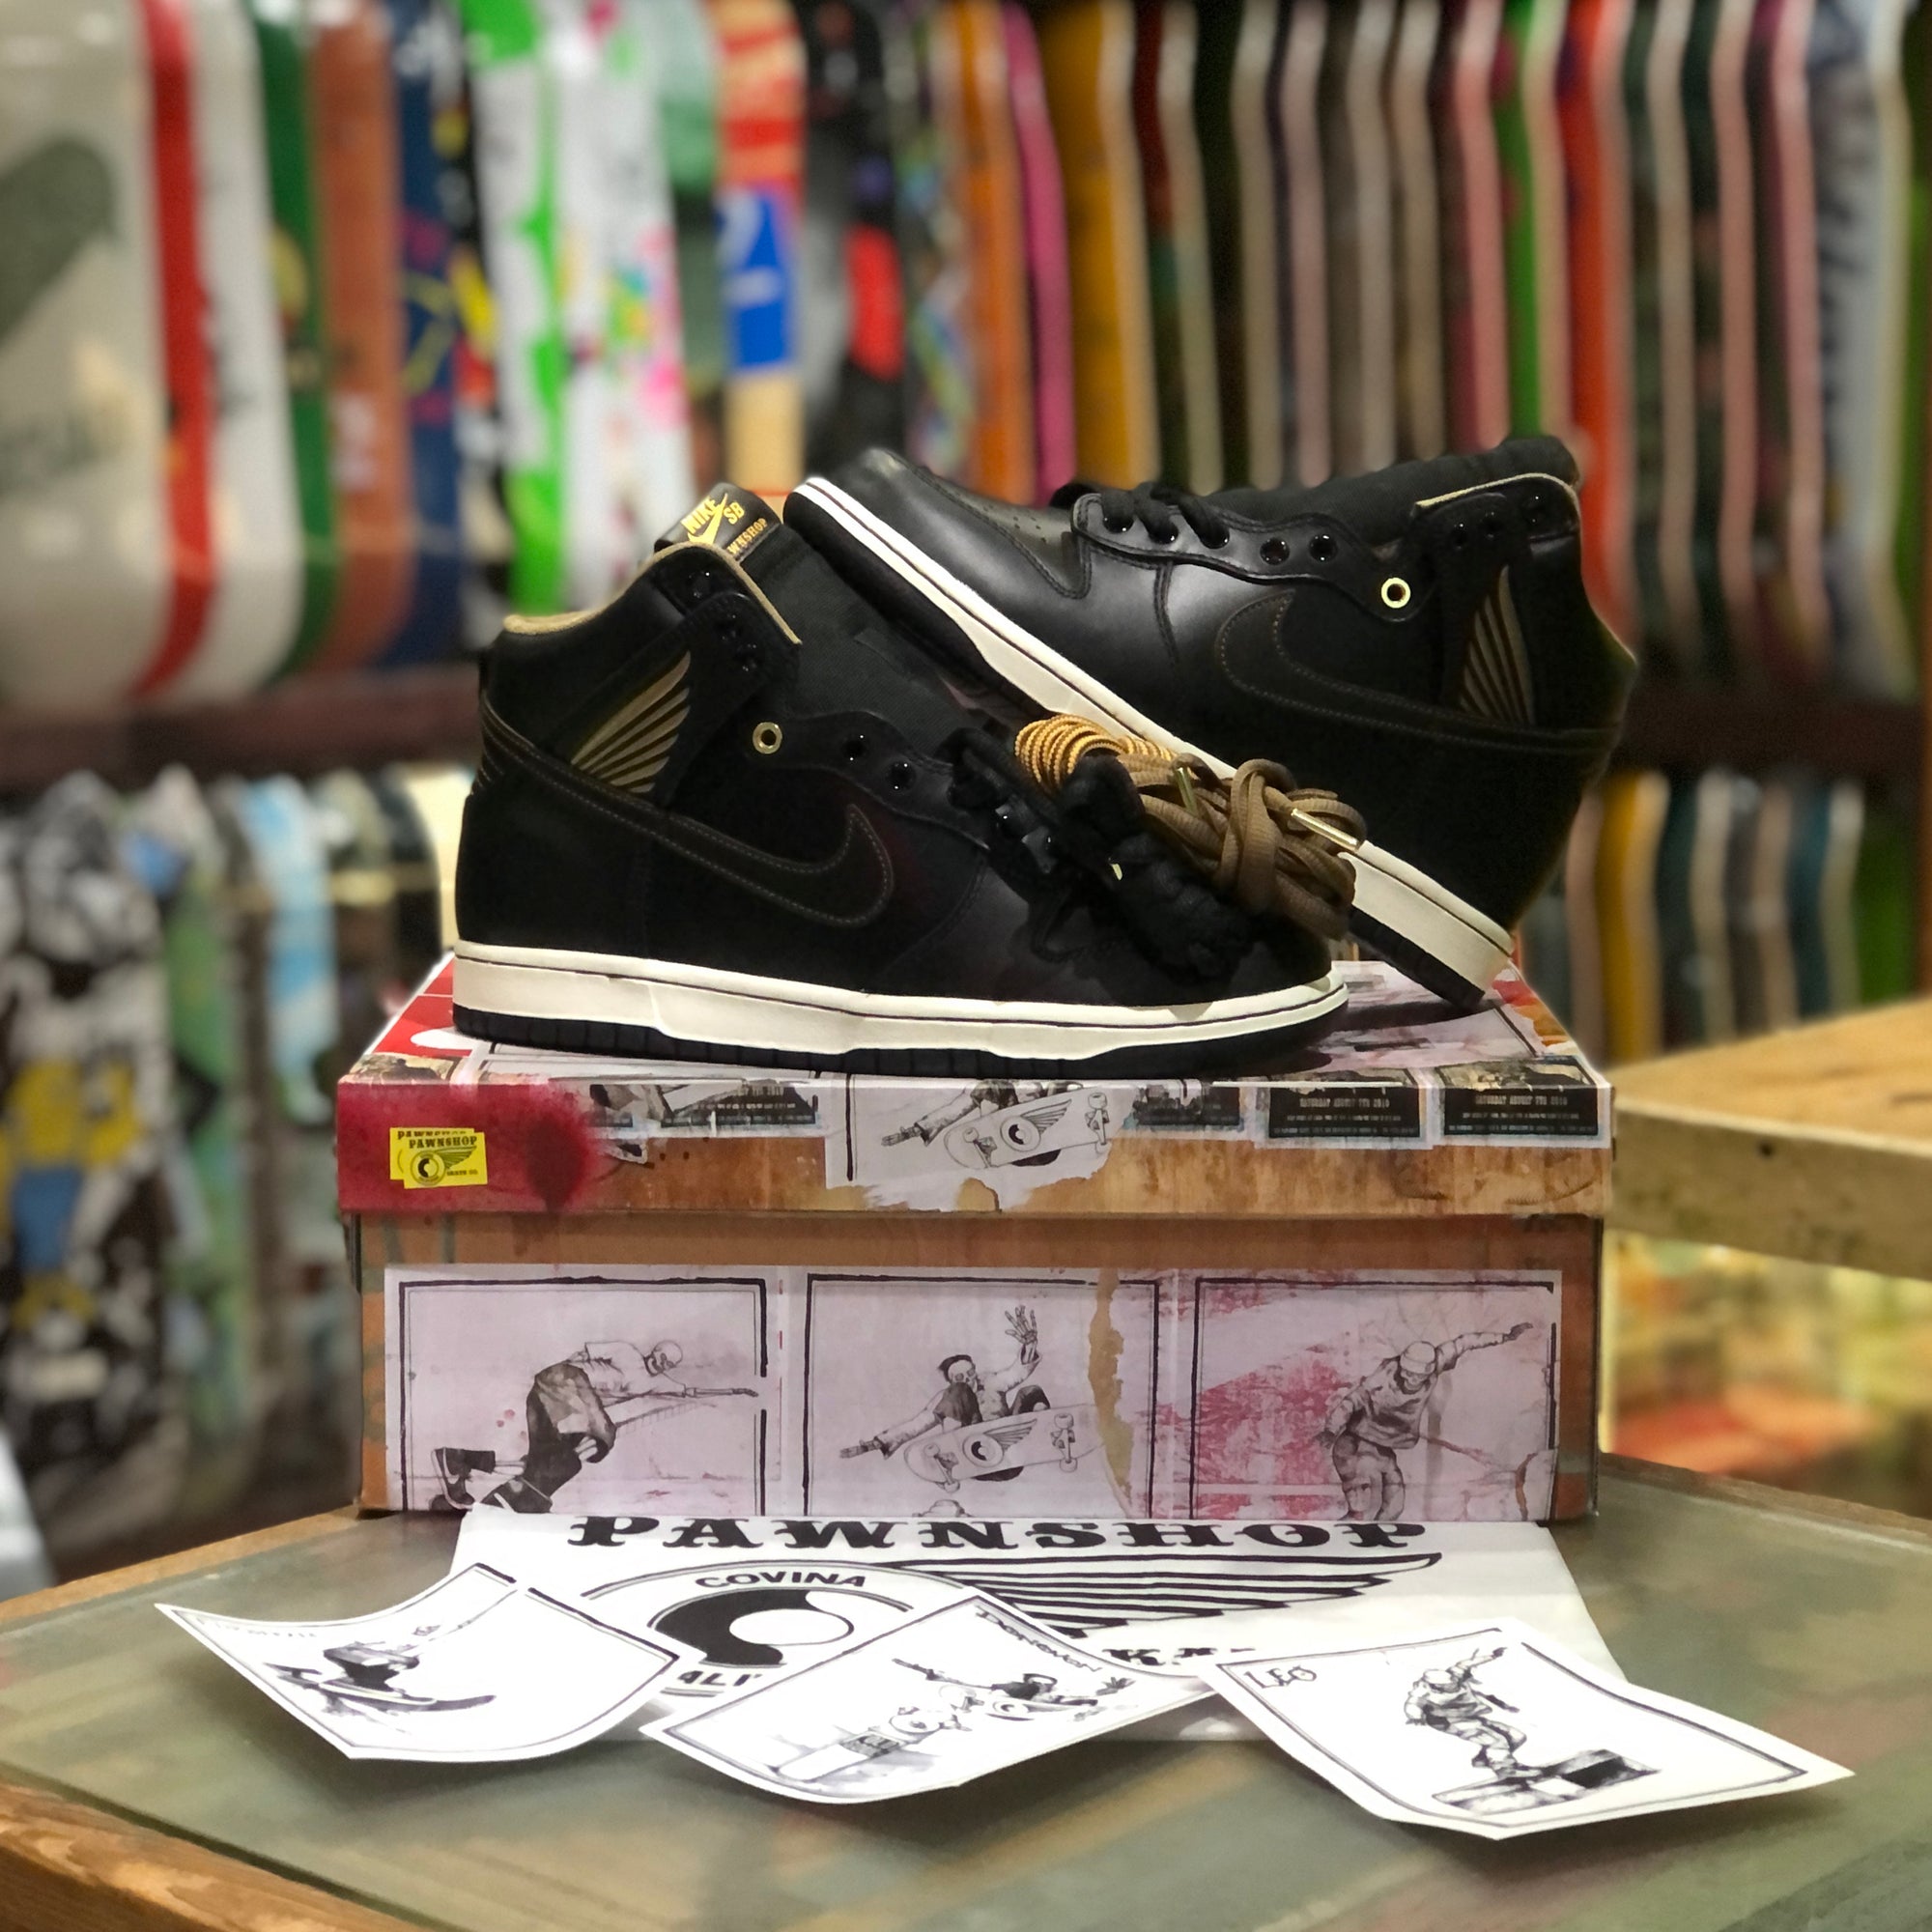 Registration for The Nike SB Dunk Low Pro by Yuto Horigome raffle